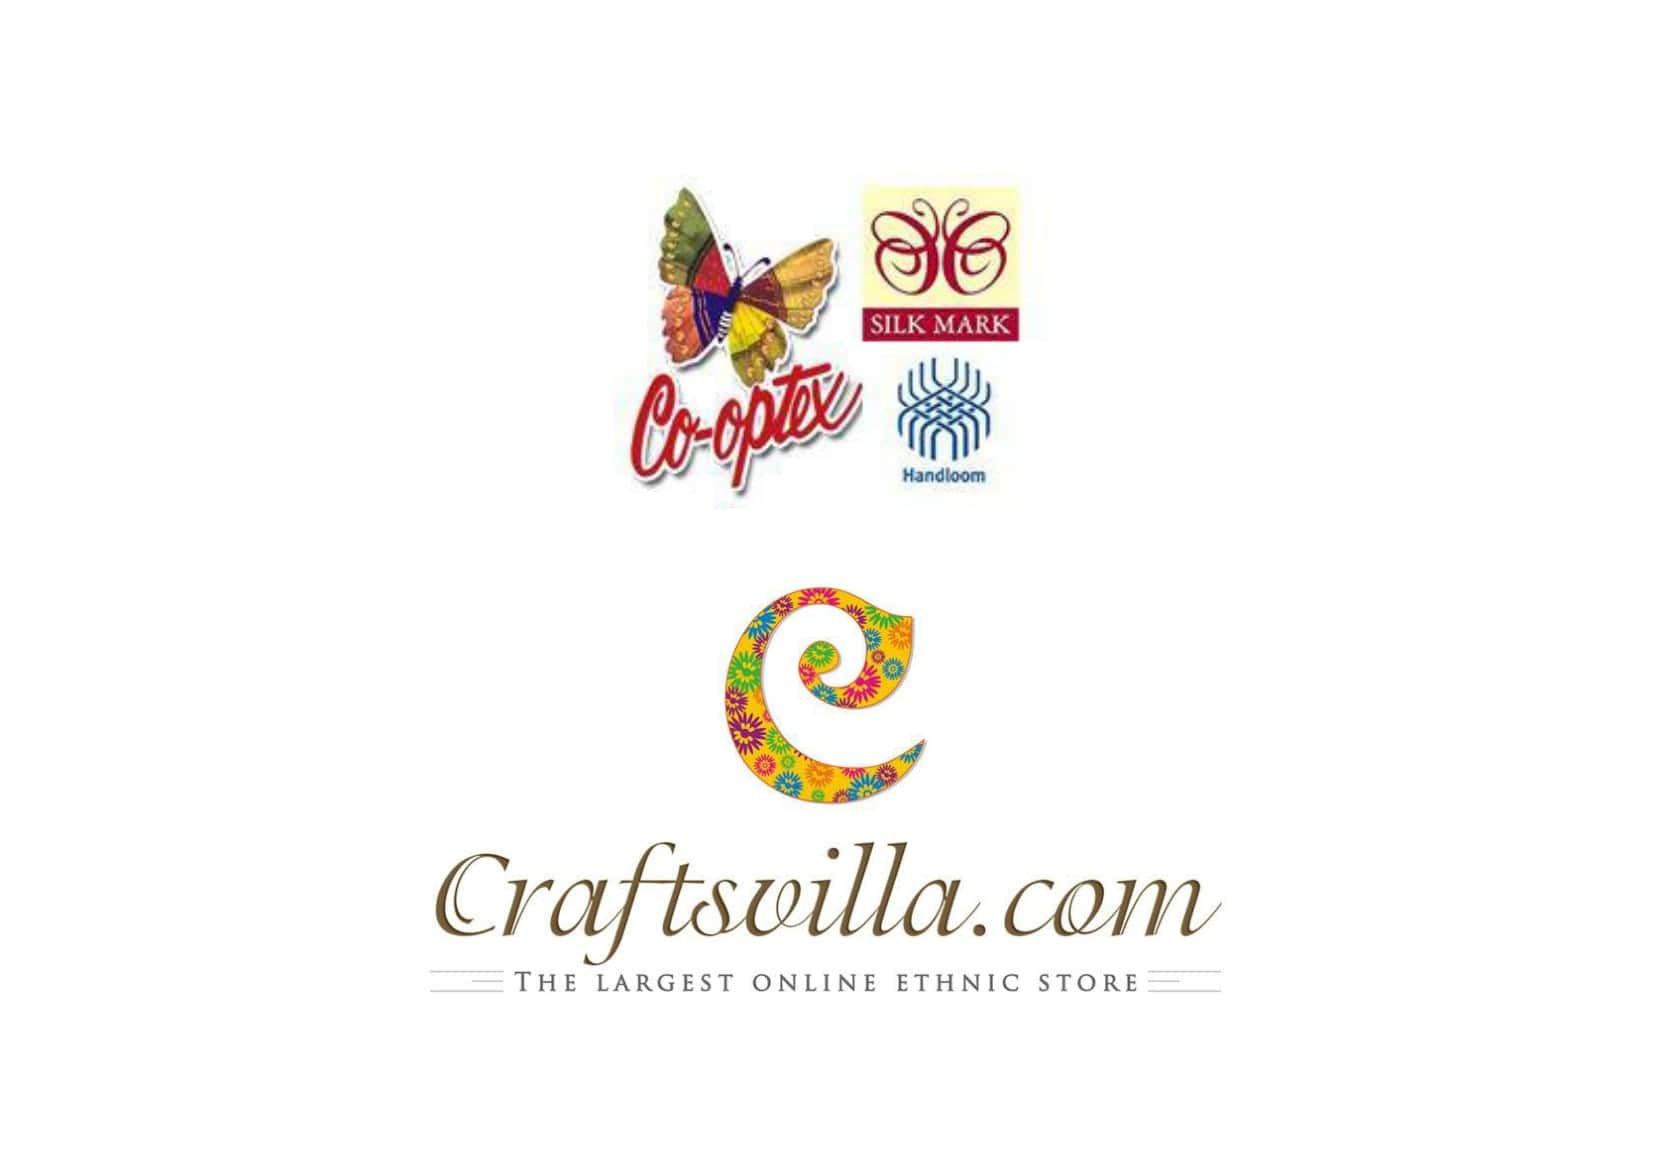 Craftsvilla partners with Co-optex to offer and promote authentic handloom products from Tamil Nadu